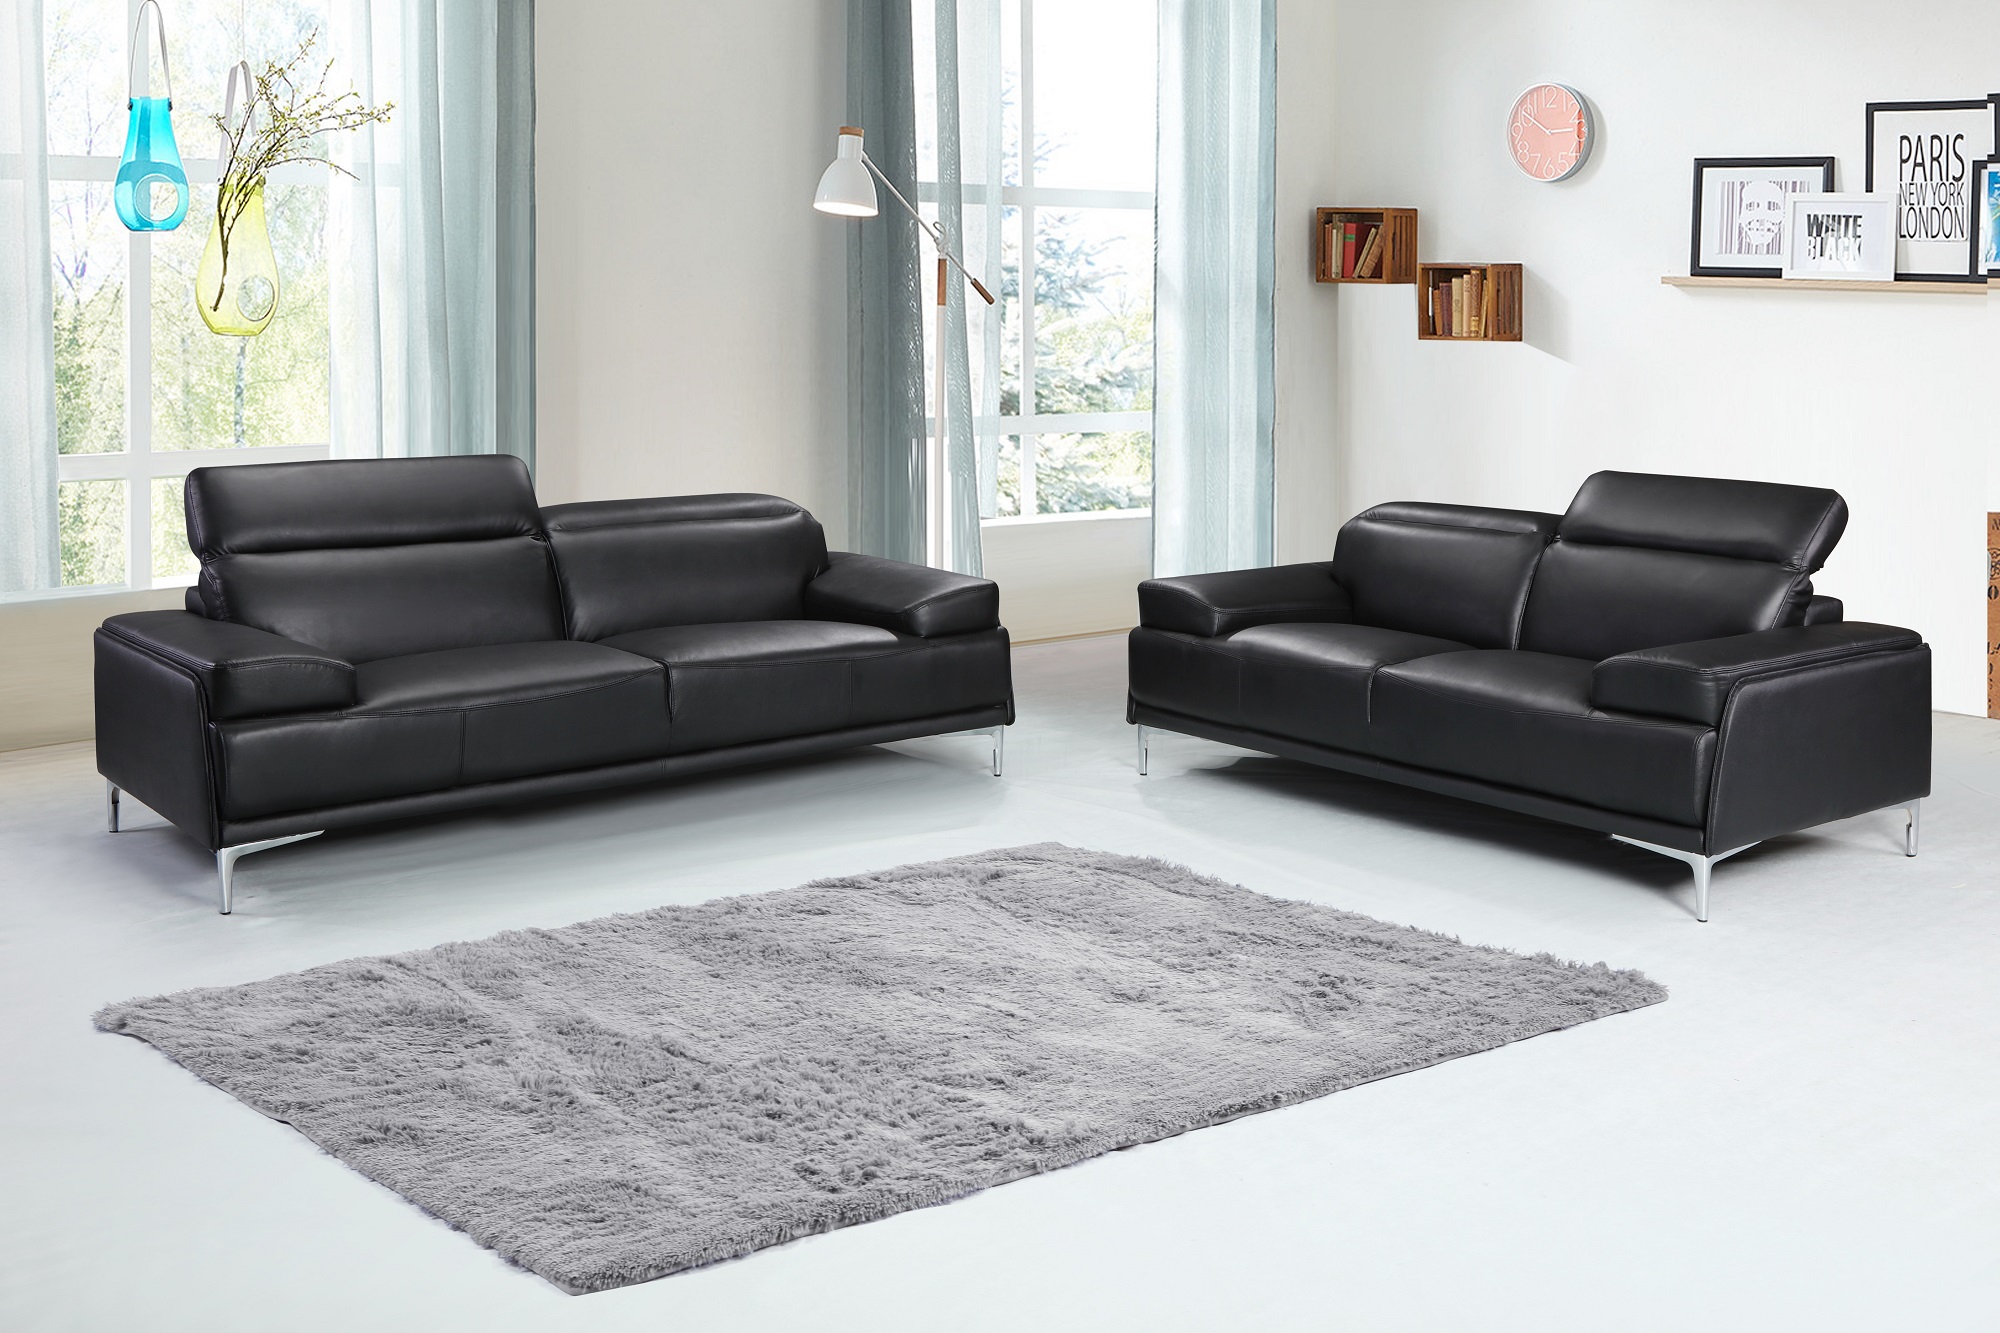 Contemporary Black Leather Living Room, Contemporary Black Leather Couch